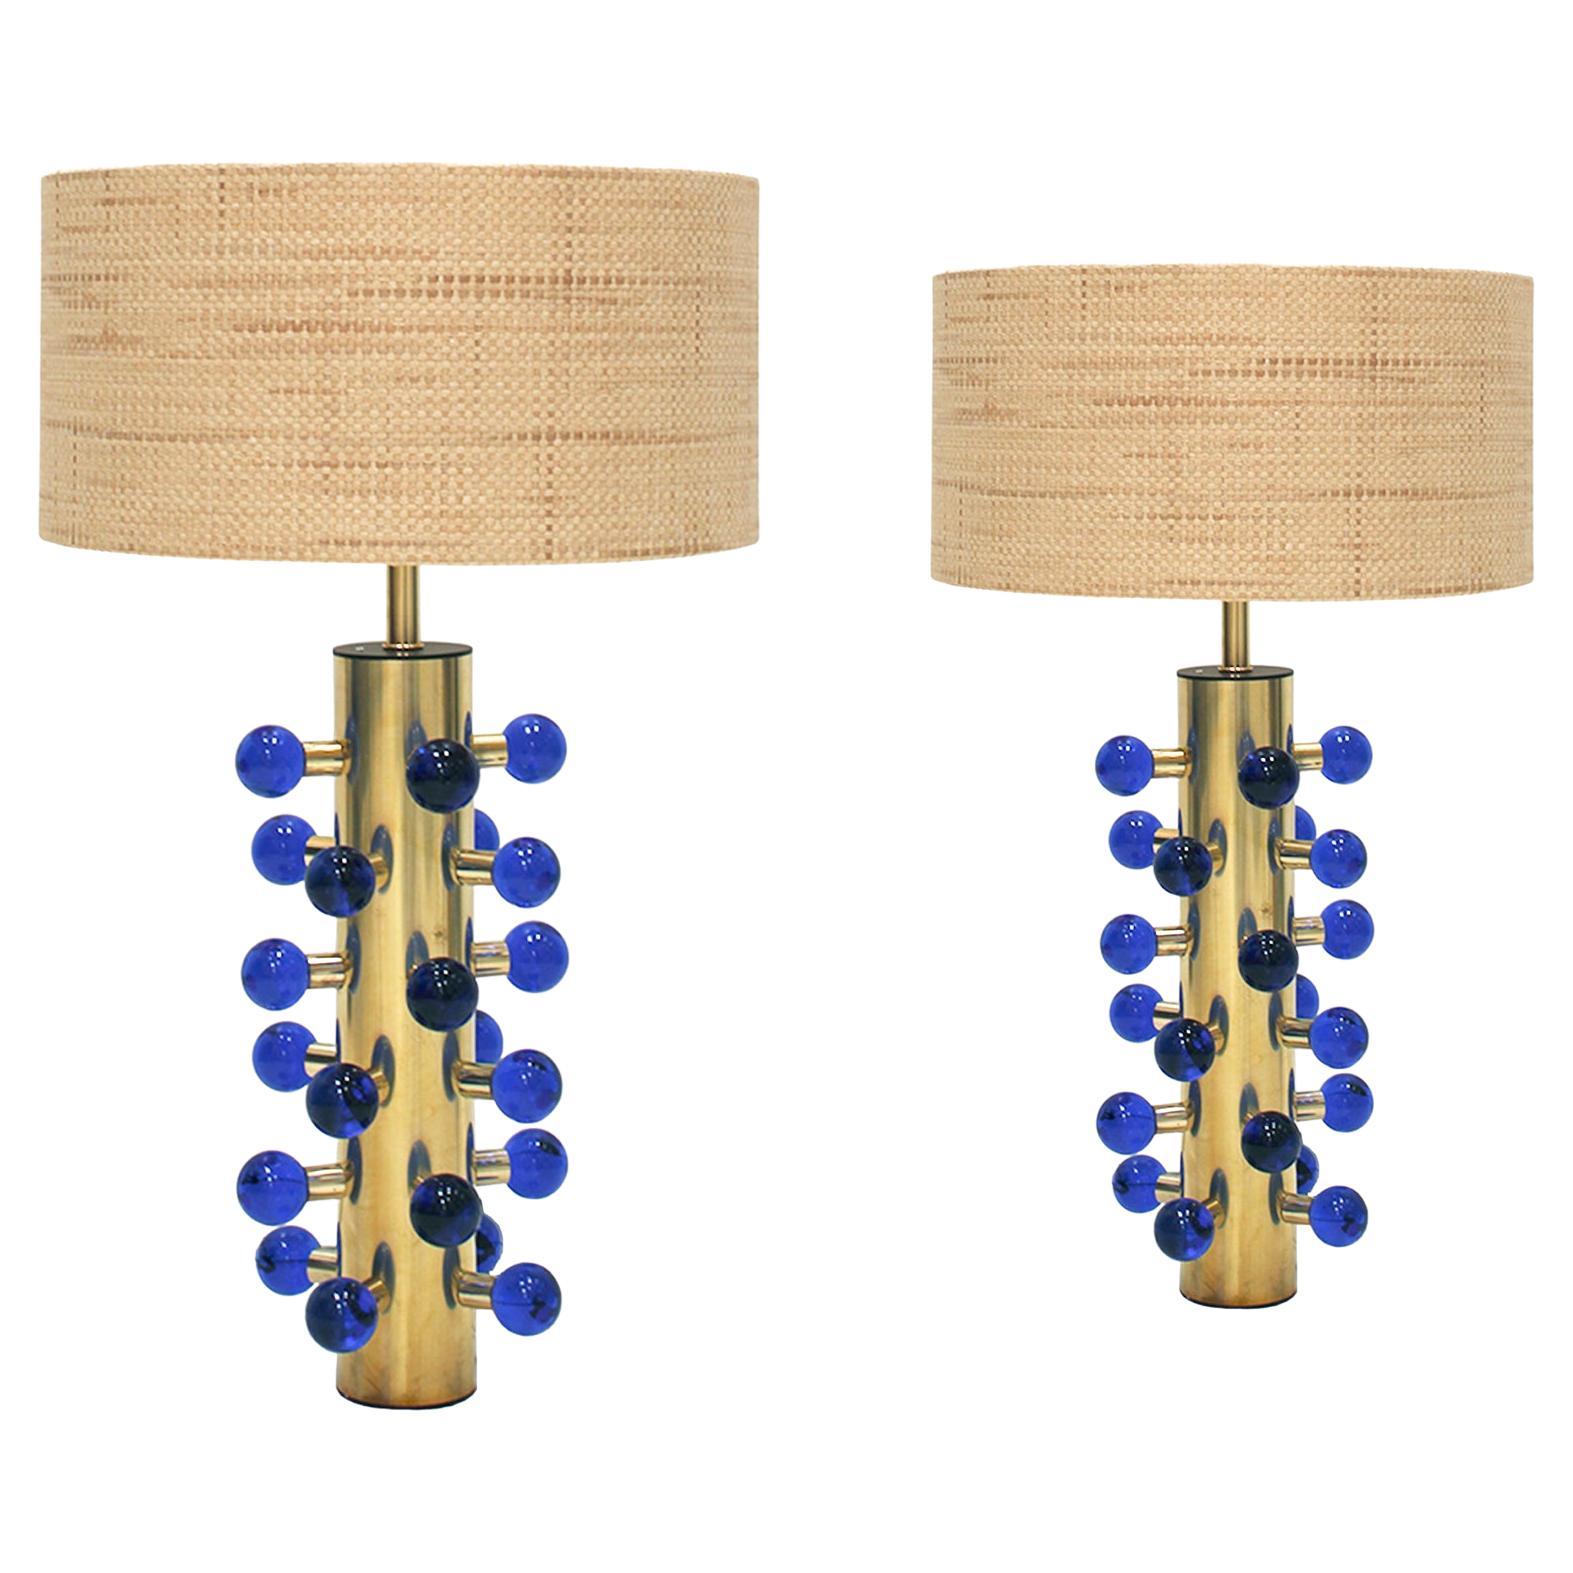 L.A. Studio Contemporary Modern Murano Glass and Brass Pair of Table Lamps For Sale